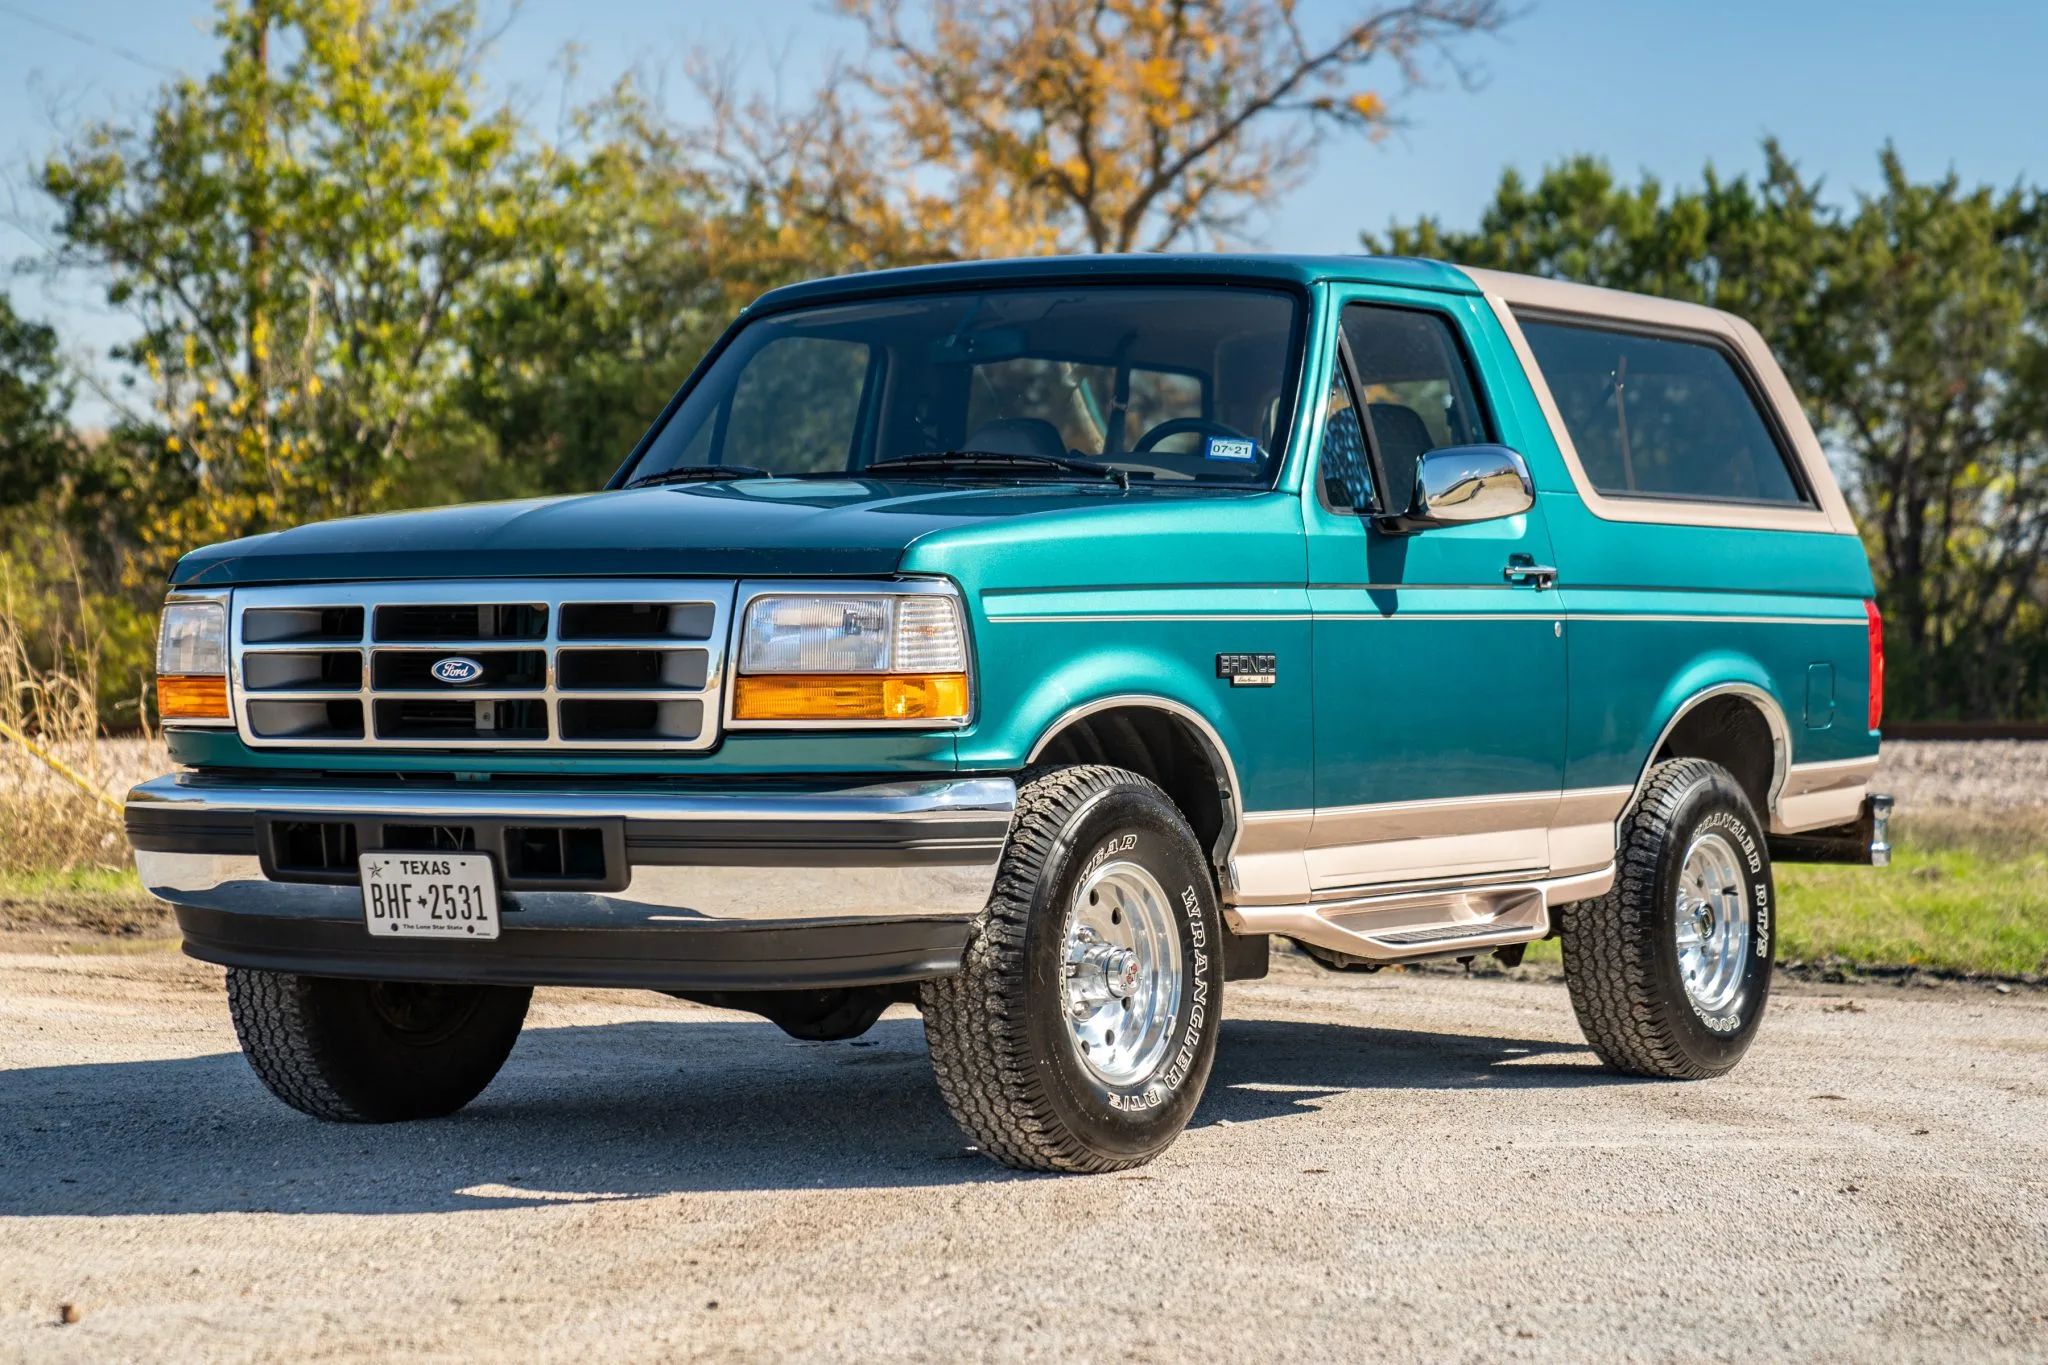 This 1996 Ford Bronco Eddie Bauer Has Less Than 5,000 Miles, It's